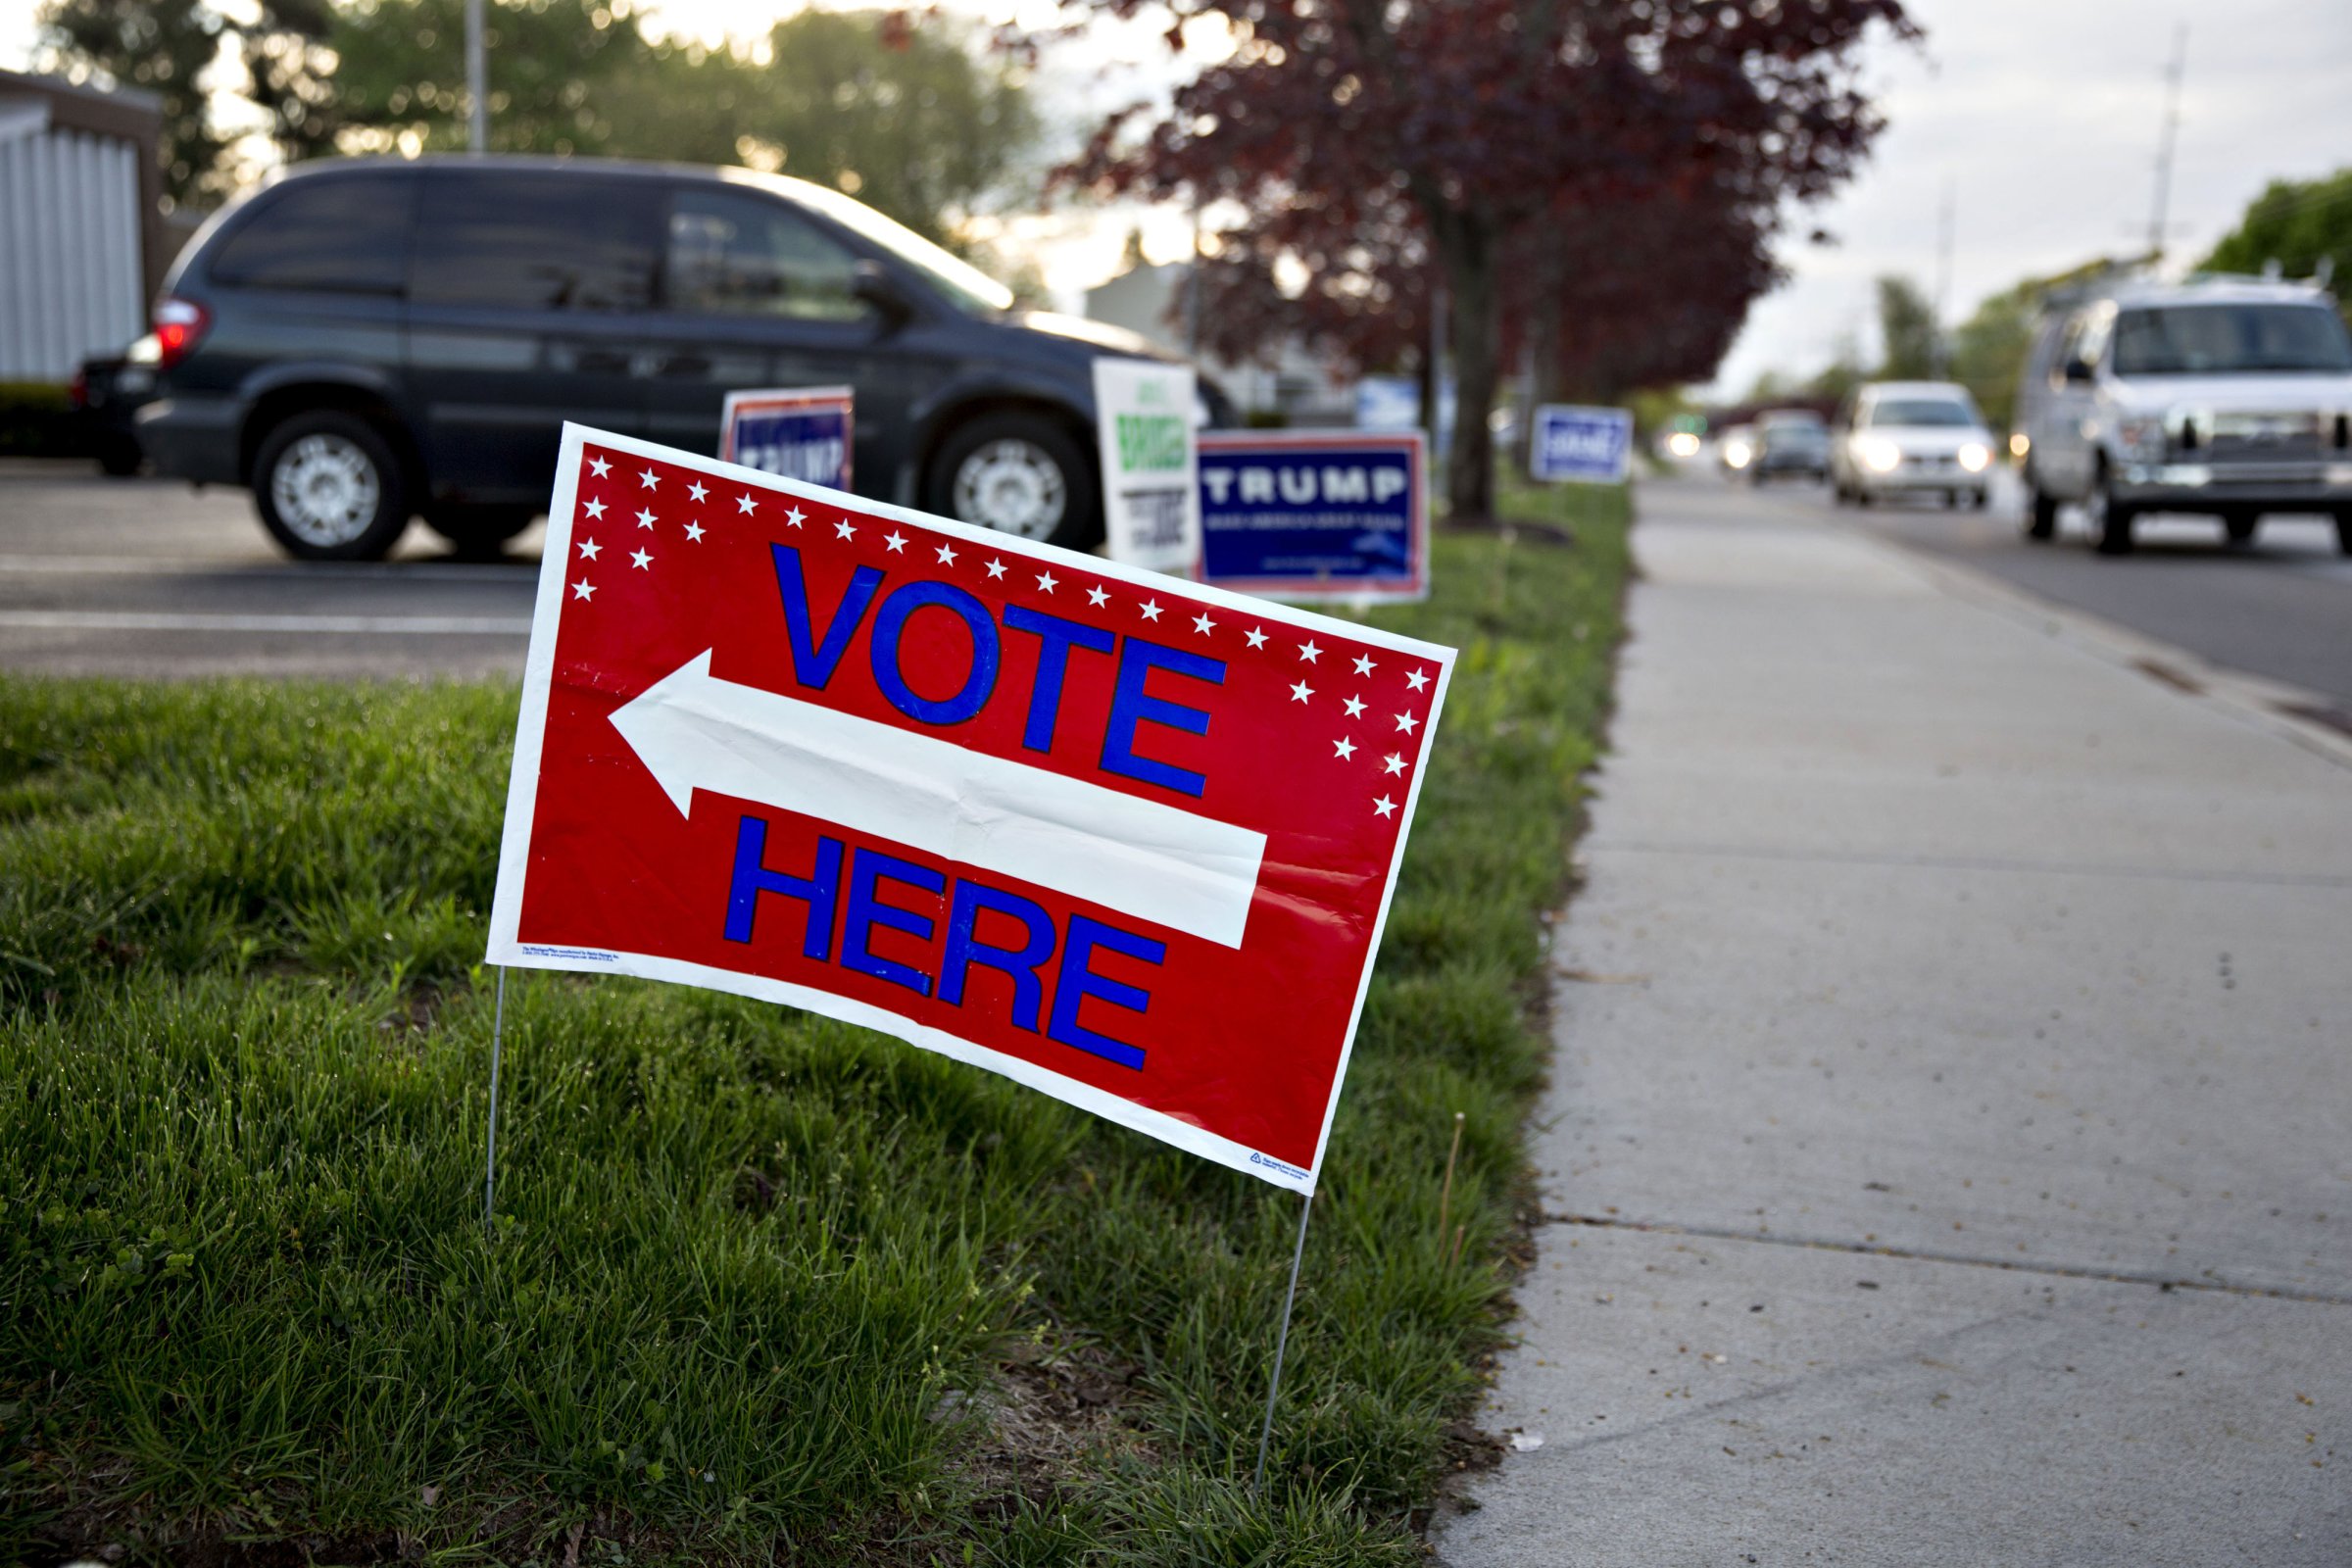 A "Vote Here" sign stands outside a polling station during the presidential primary vote in South Bend, Indiana, U.S., on Tuesday, May 3, 2016.